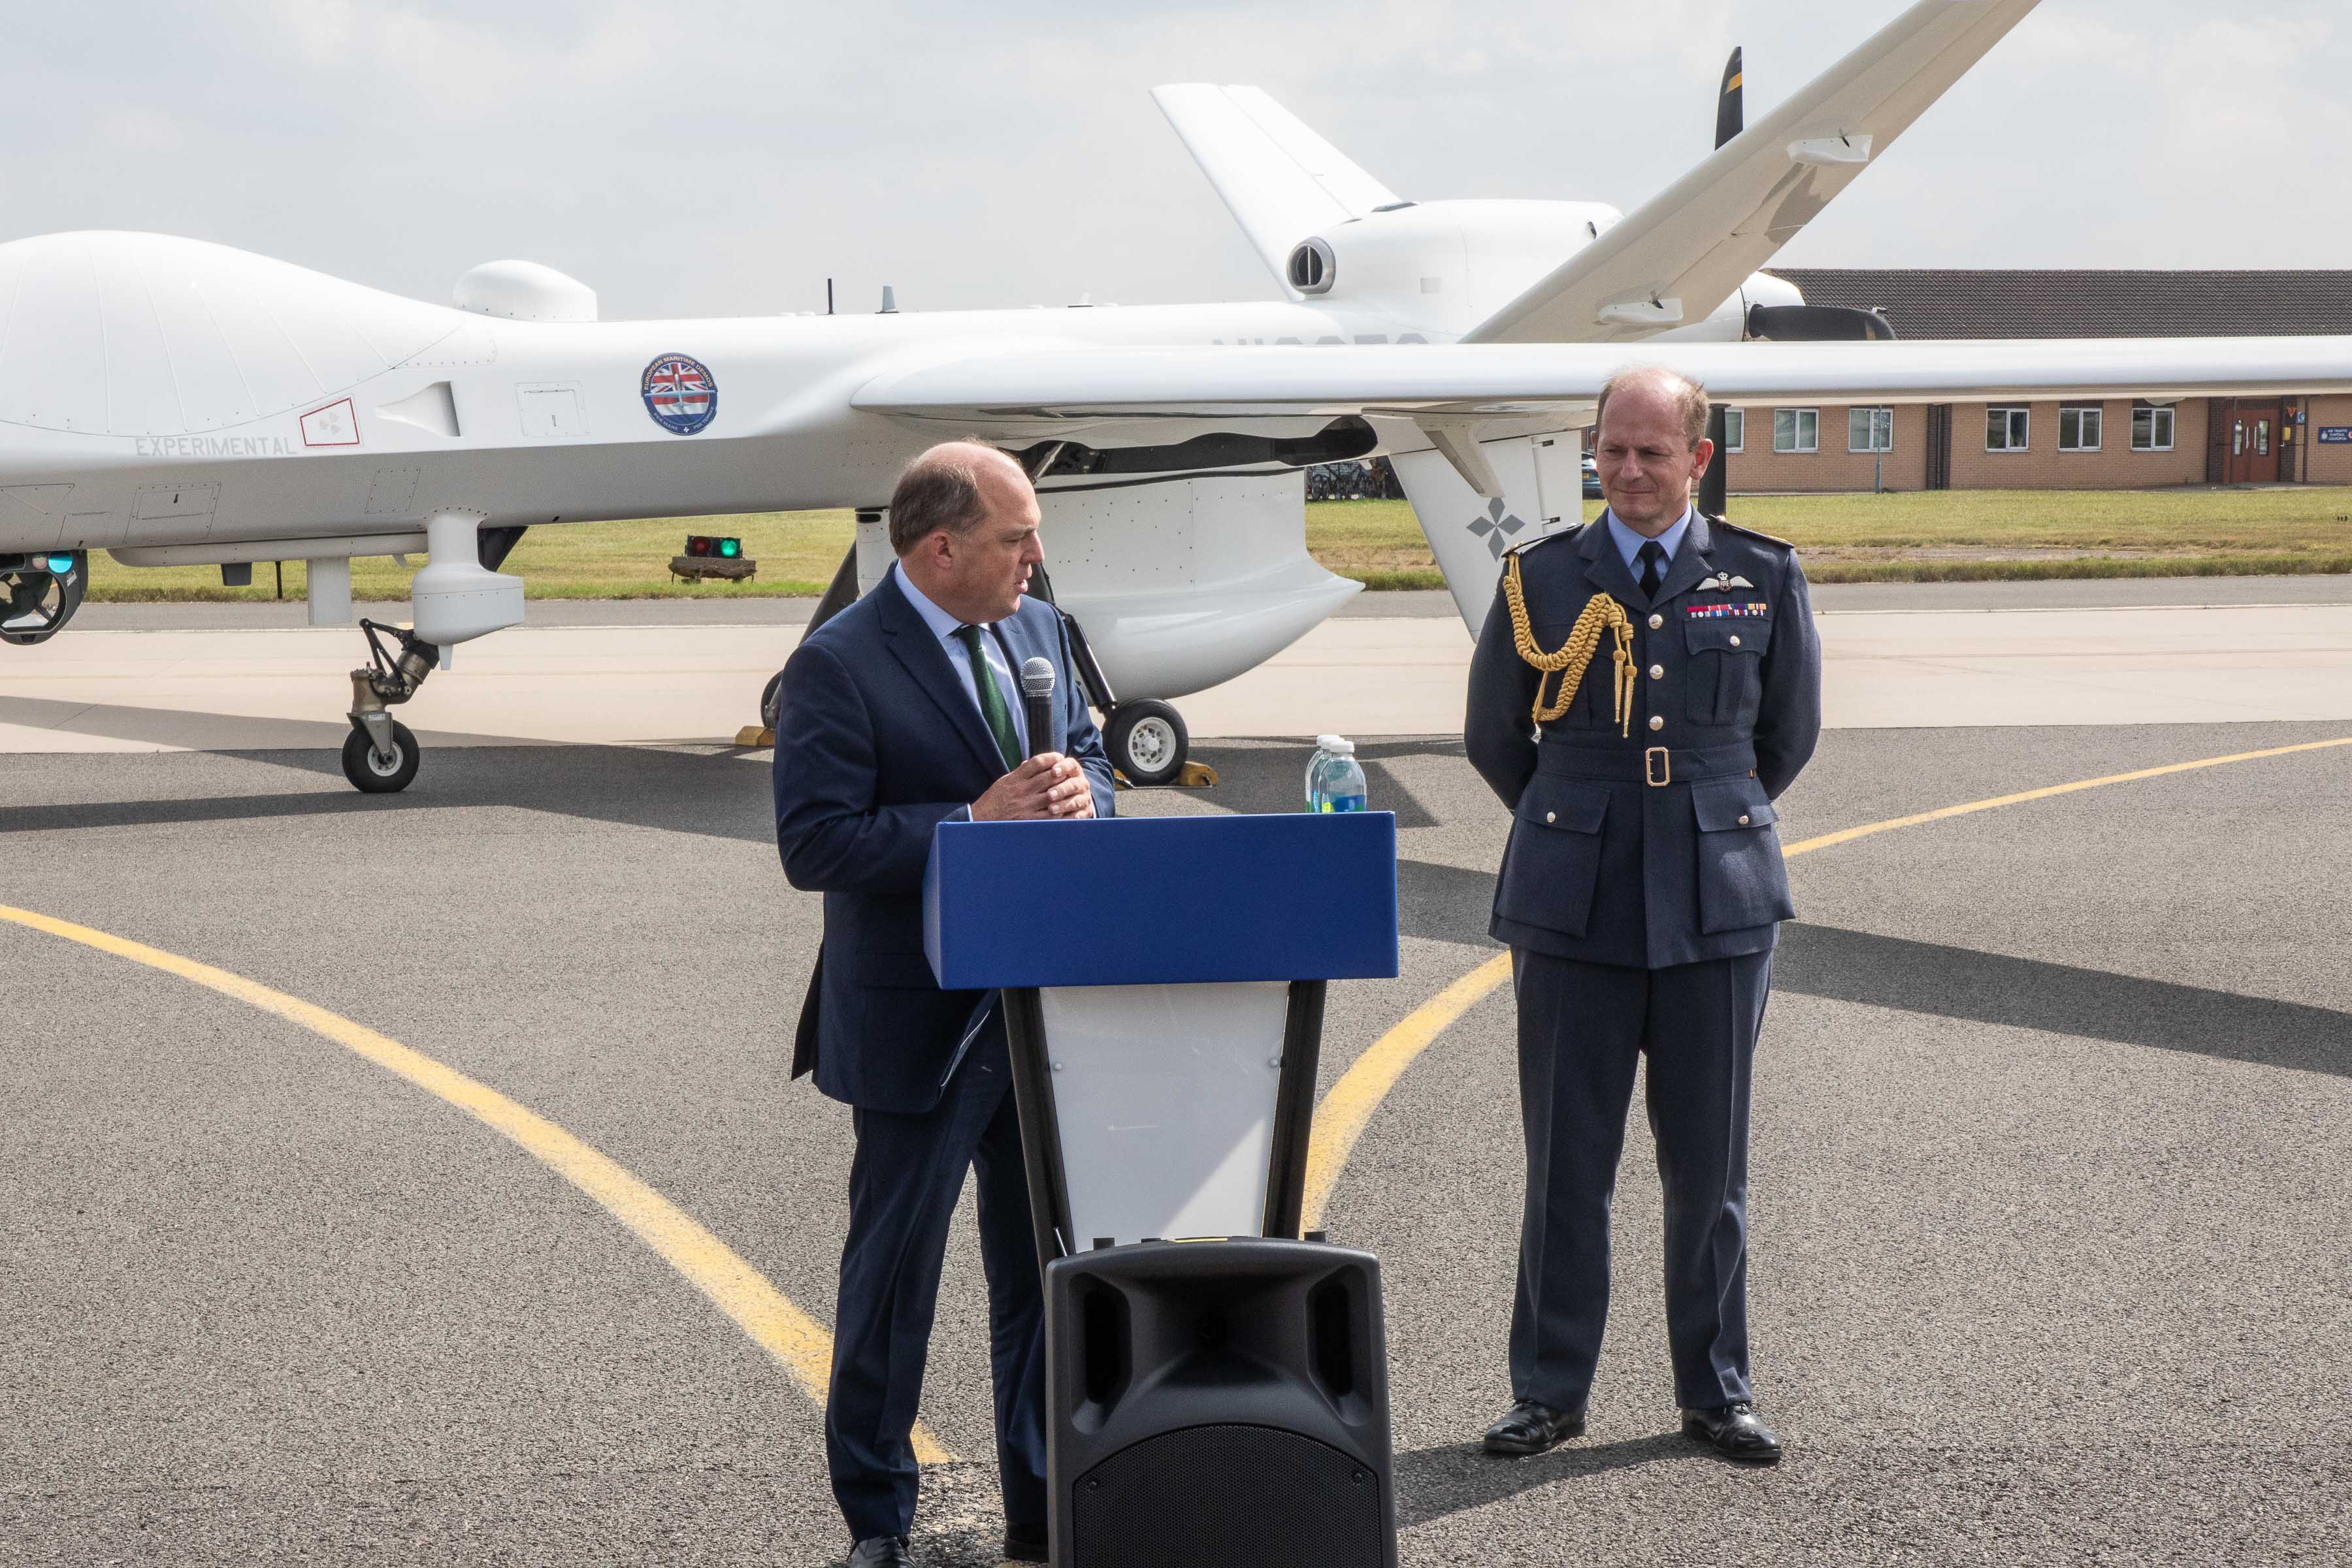 Image shows Defence Secretary Ben Wallace speaking in front of the Protector aircraft.